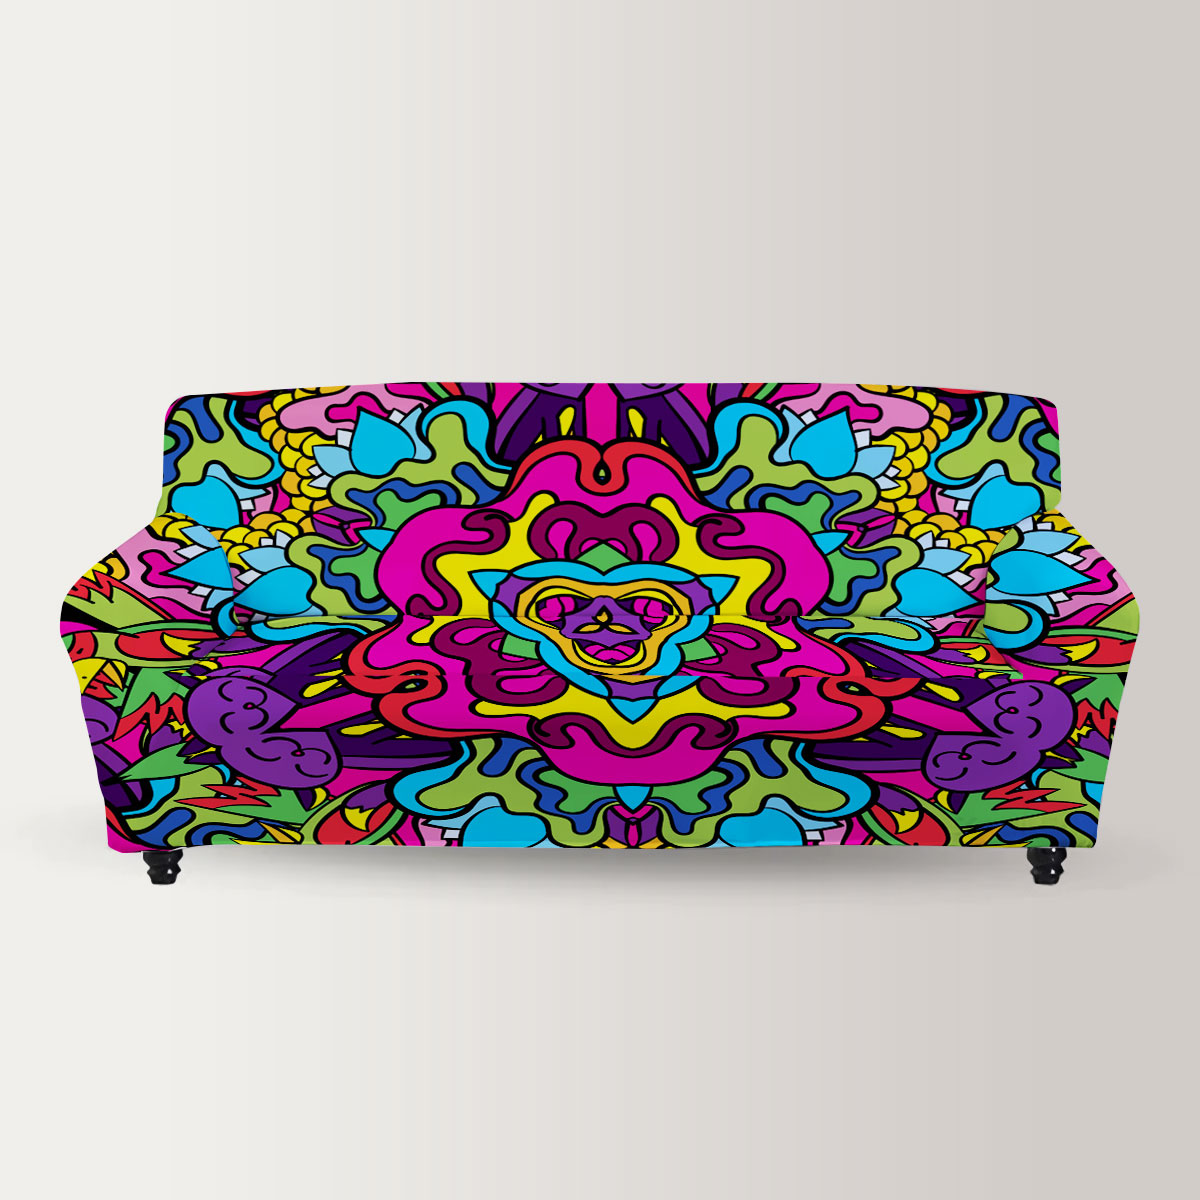 Psychedelic Hippie Sofa Cover